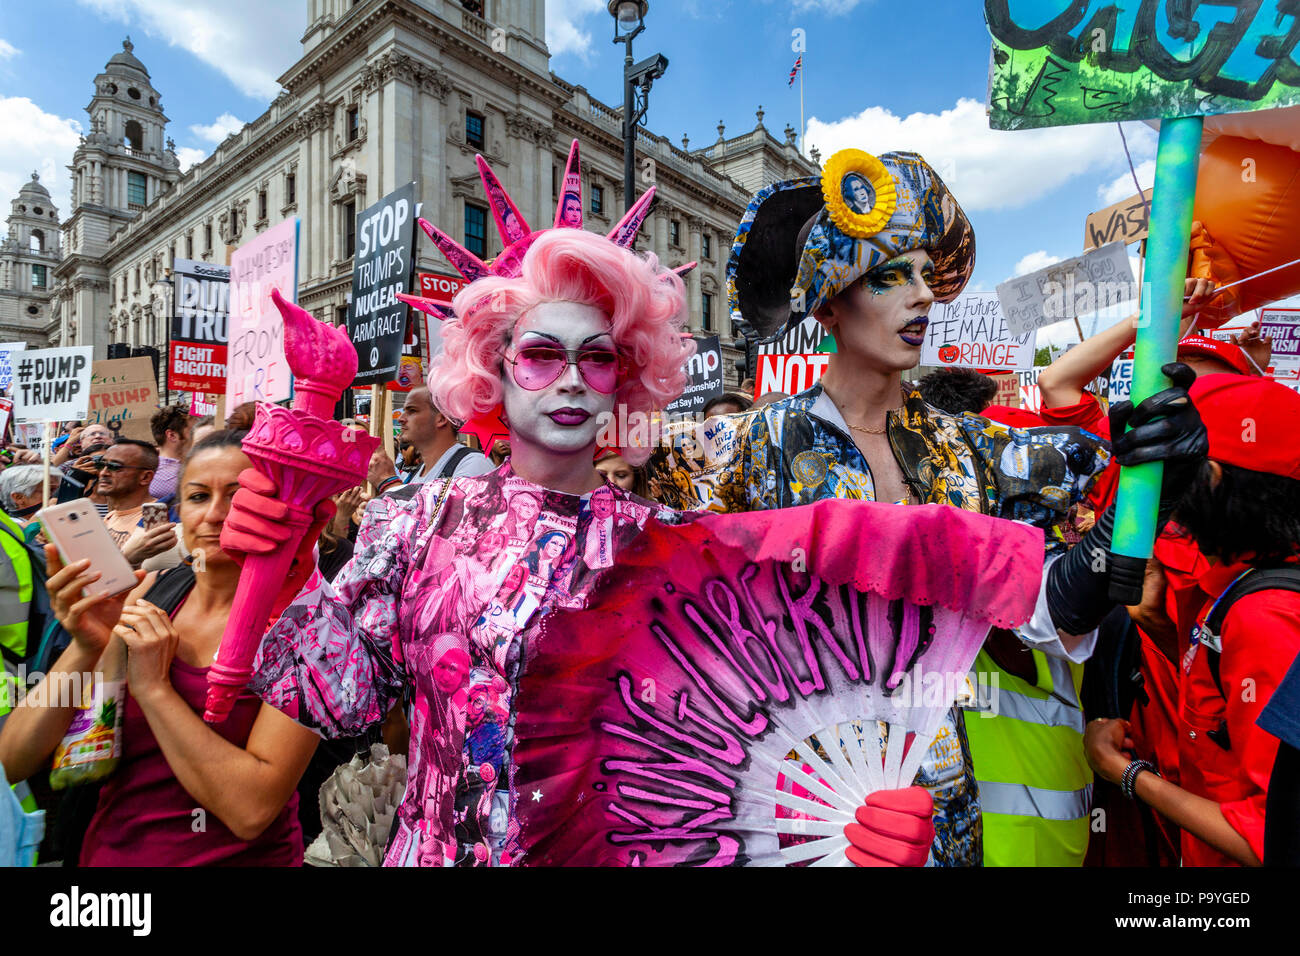 Anti Trump Protestors March Down Whitehall In Protest At The Visit To The UK of US President Donald Trump, London, England Stock Photo